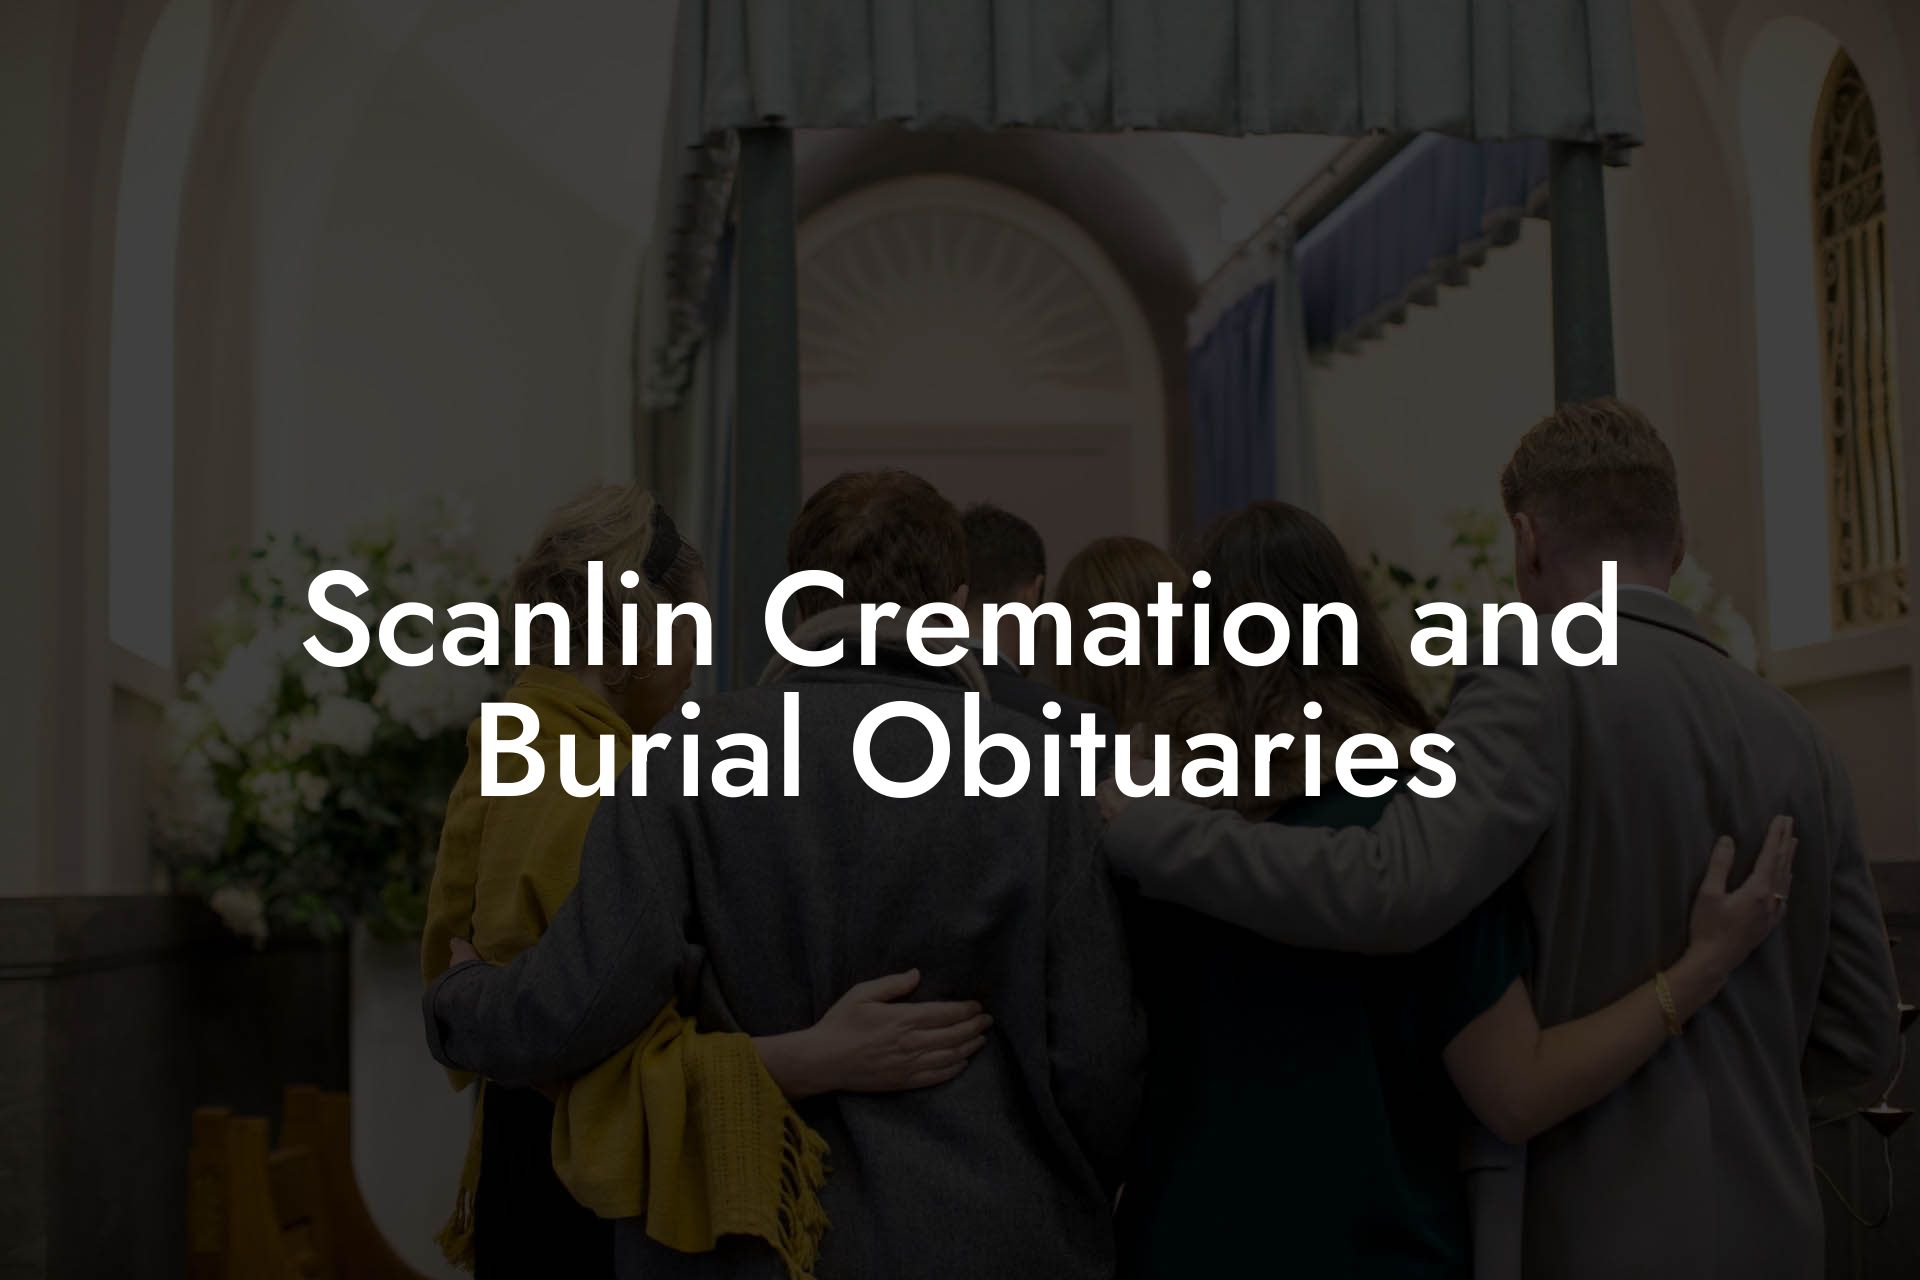 Scanlin Cremation and Burial Obituaries